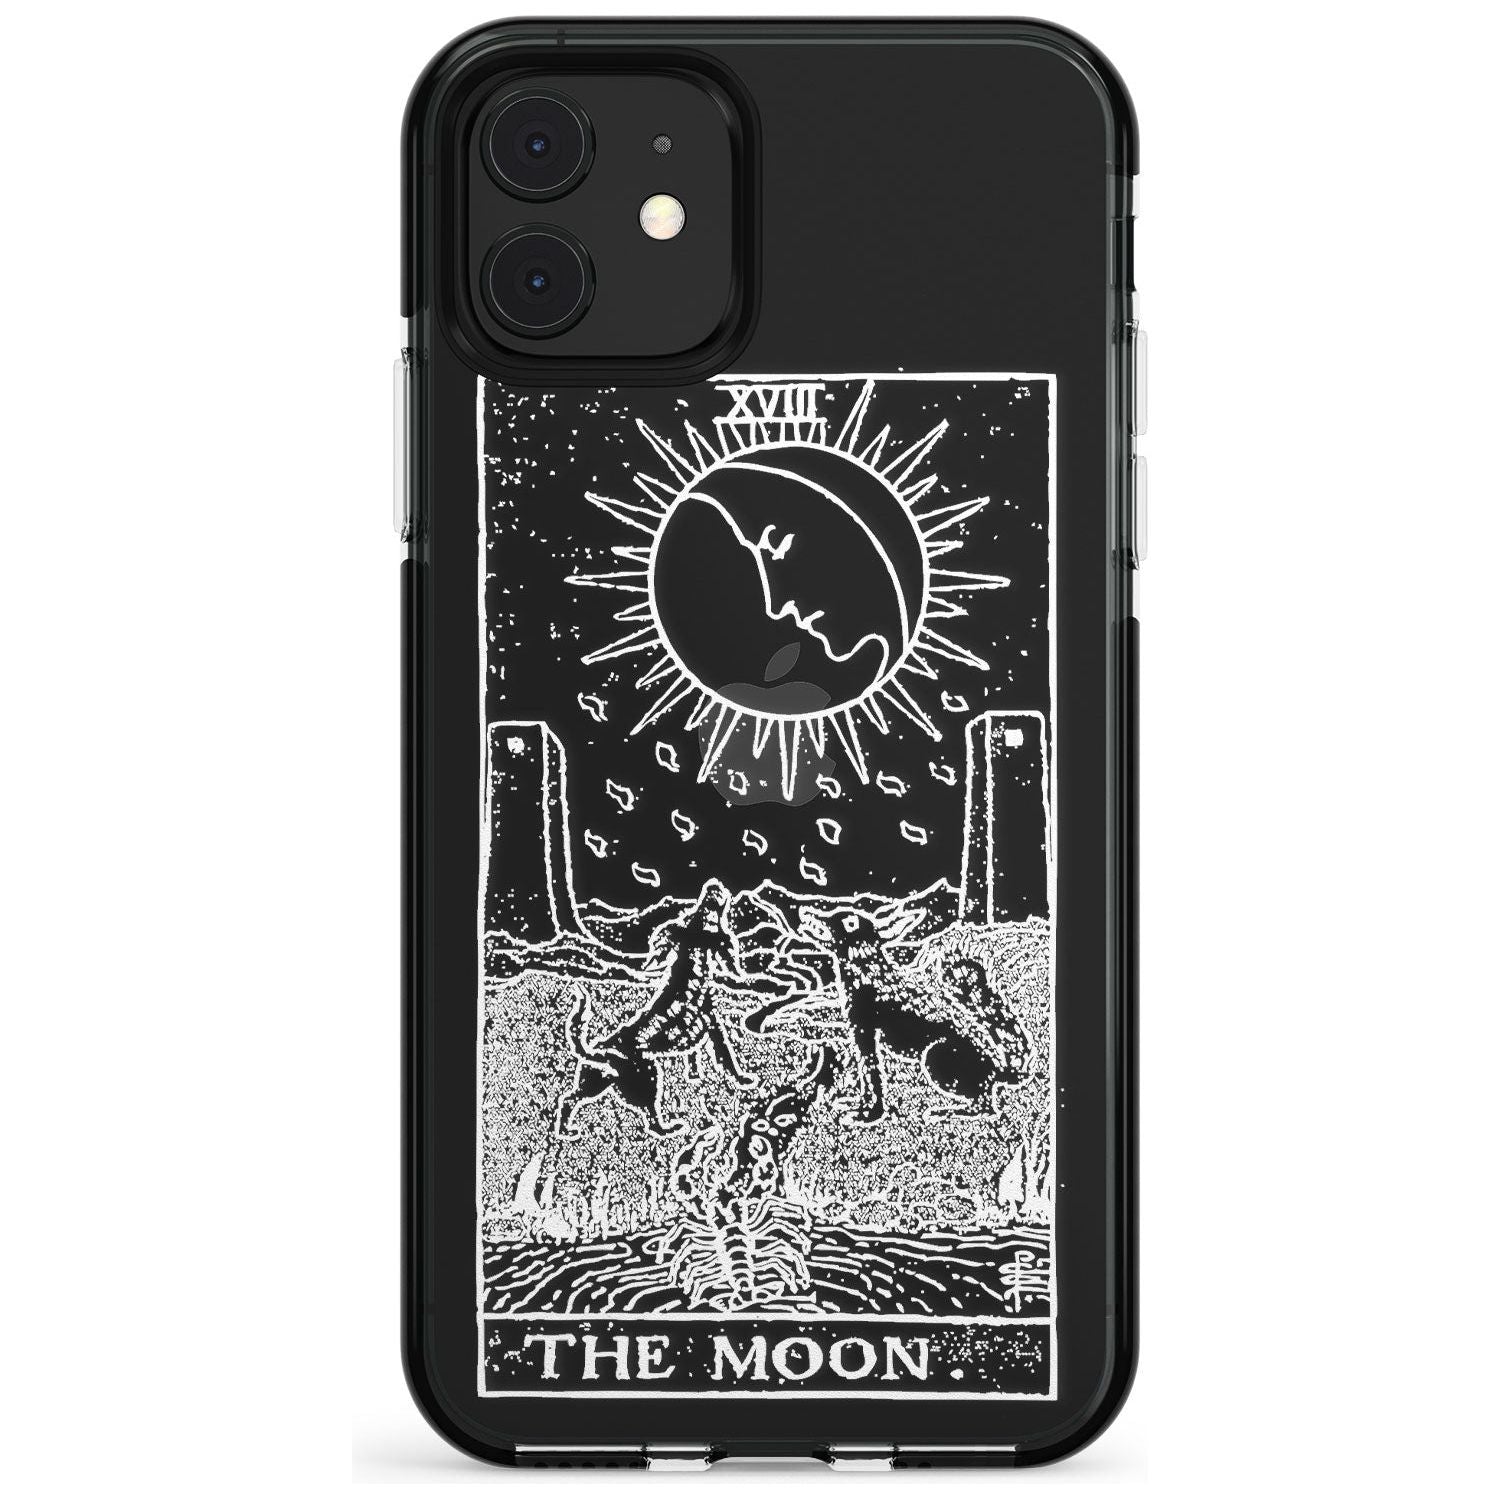 The Moon Tarot Card - White Transparent Pink Fade Impact Phone Case for iPhone 11 Pro Max